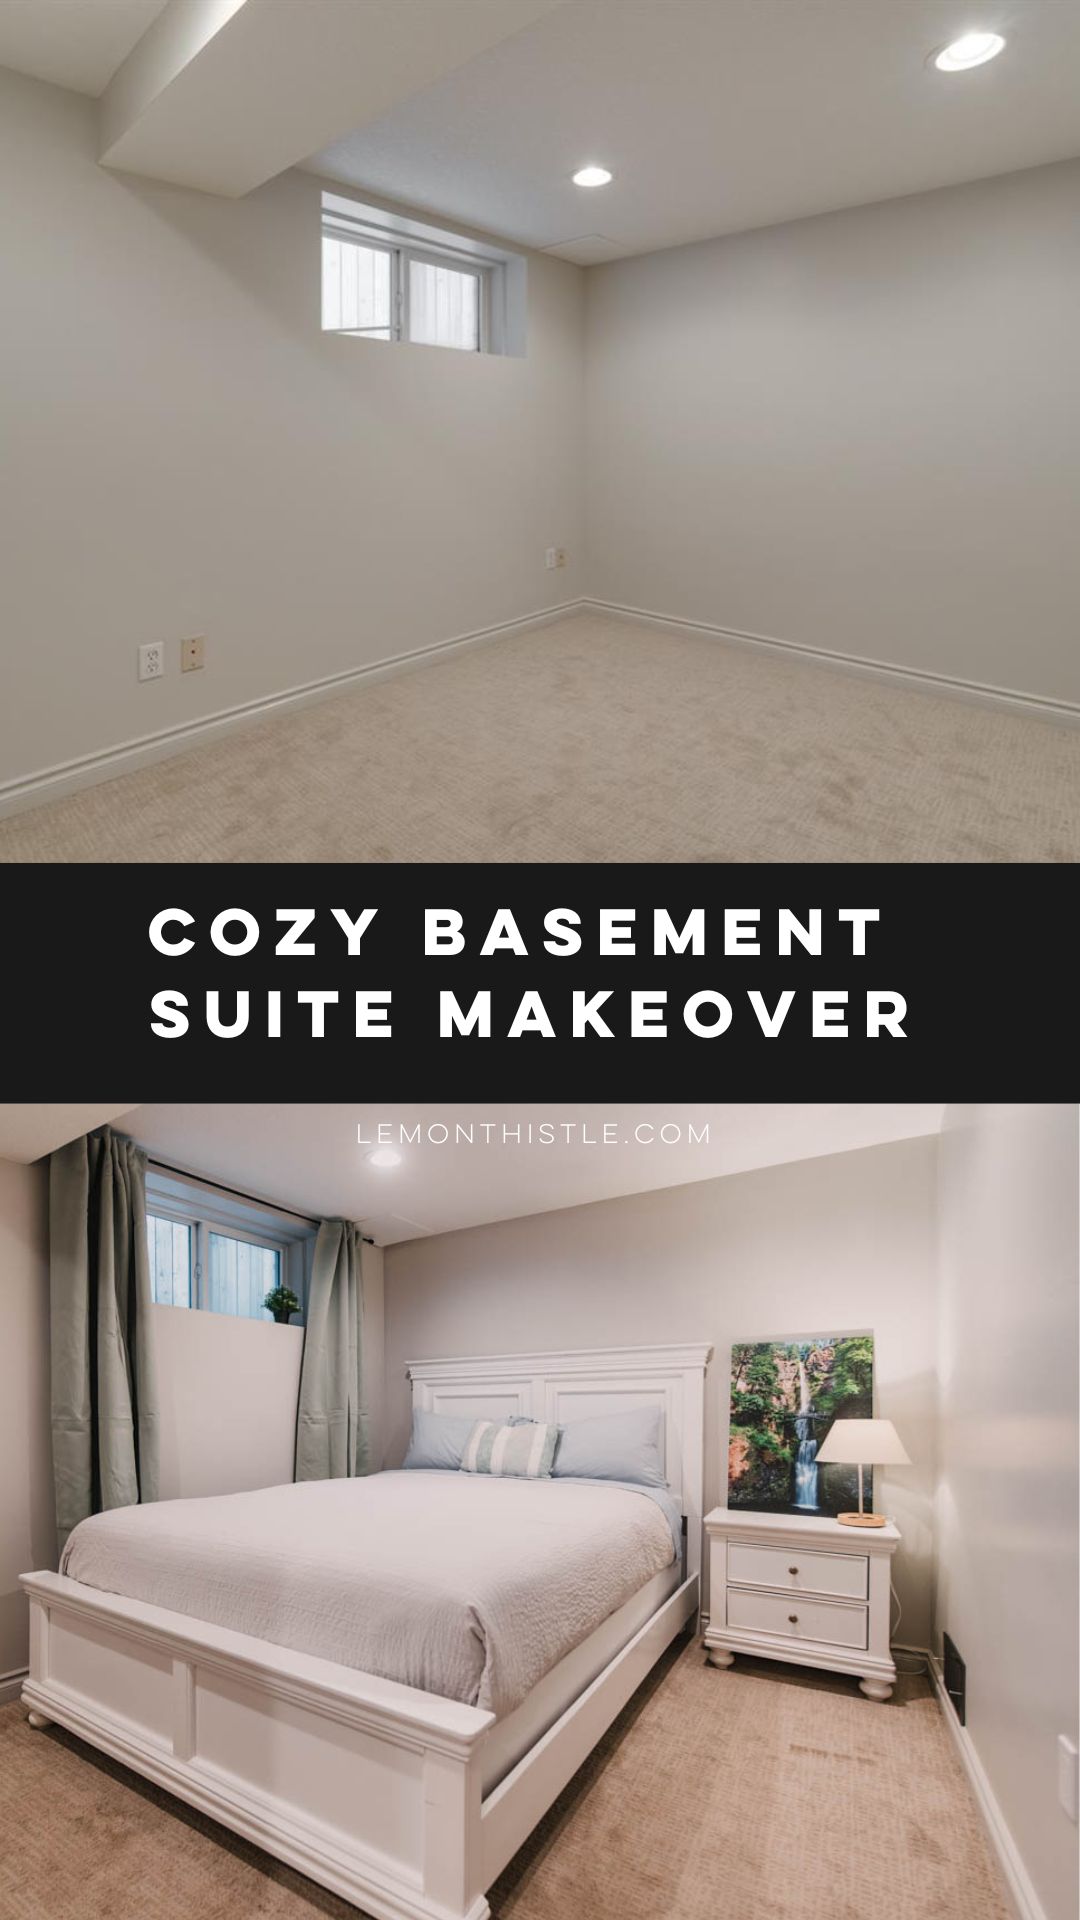 Cozy basement bedroom before and after photos with text over